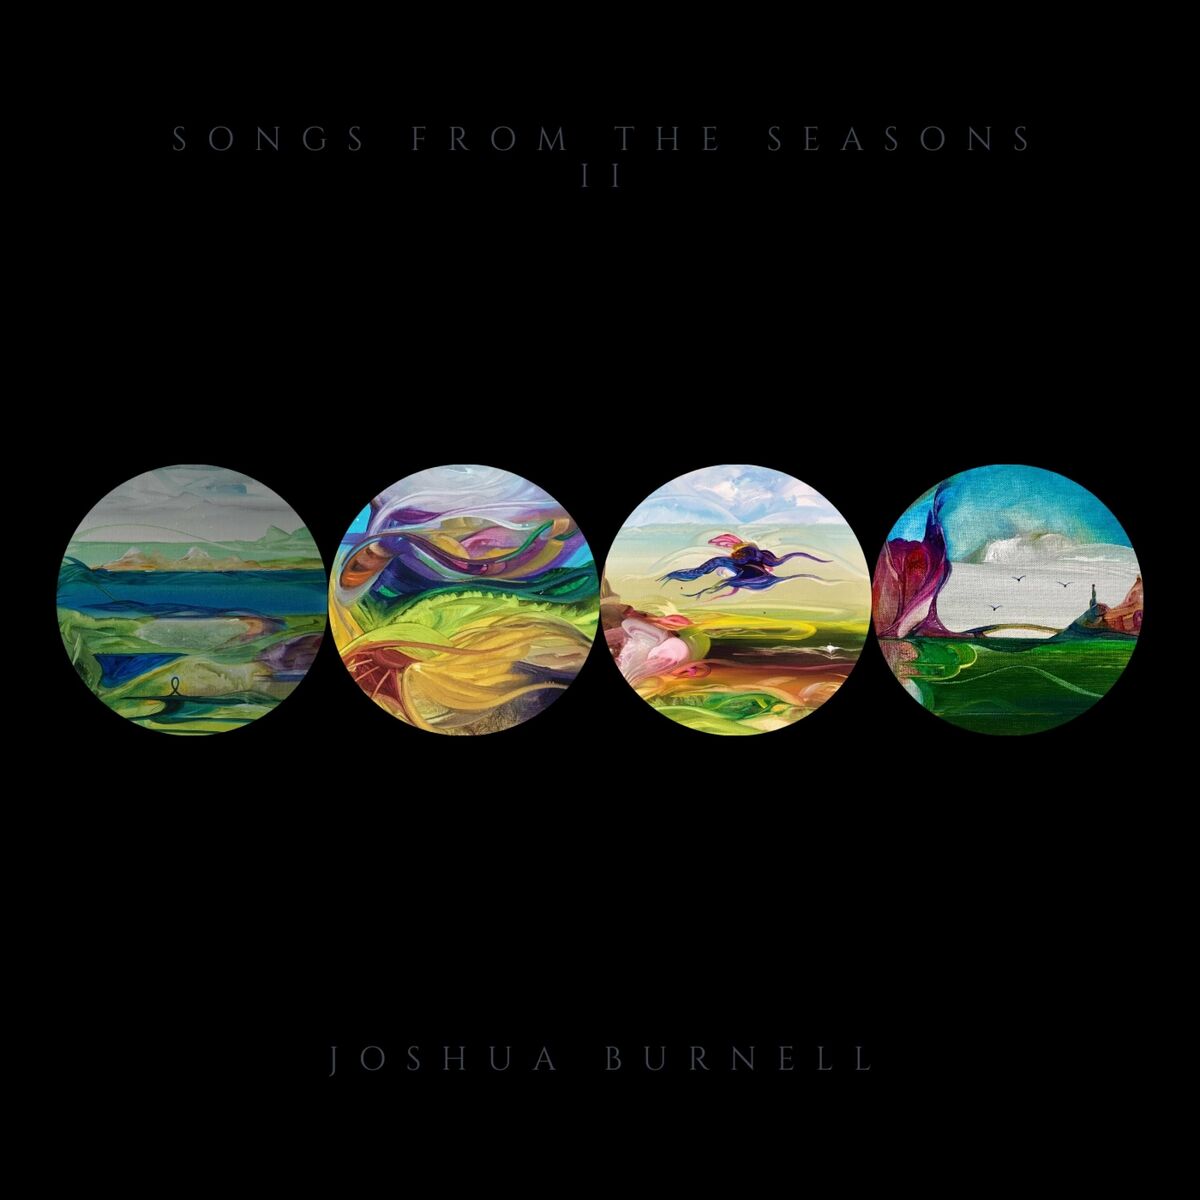 Joshua Burnell – 2018 - Songs From The Seasons (Remastered) + 2022 - Songs From The Seasons, part 2